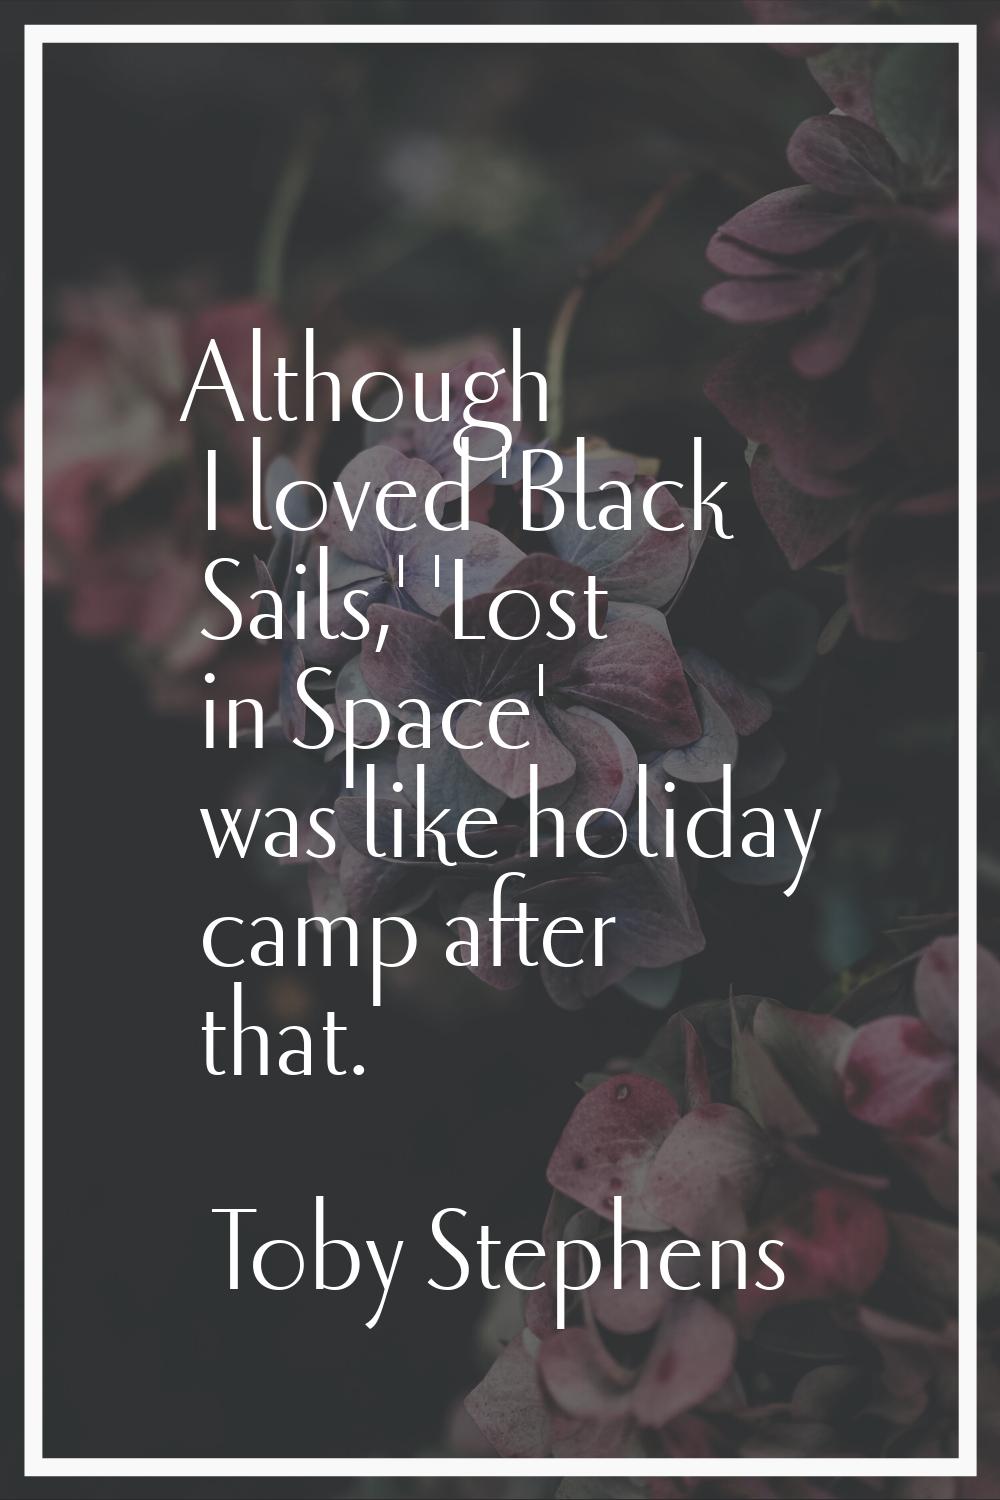 Although I loved 'Black Sails,' 'Lost in Space' was like holiday camp after that.